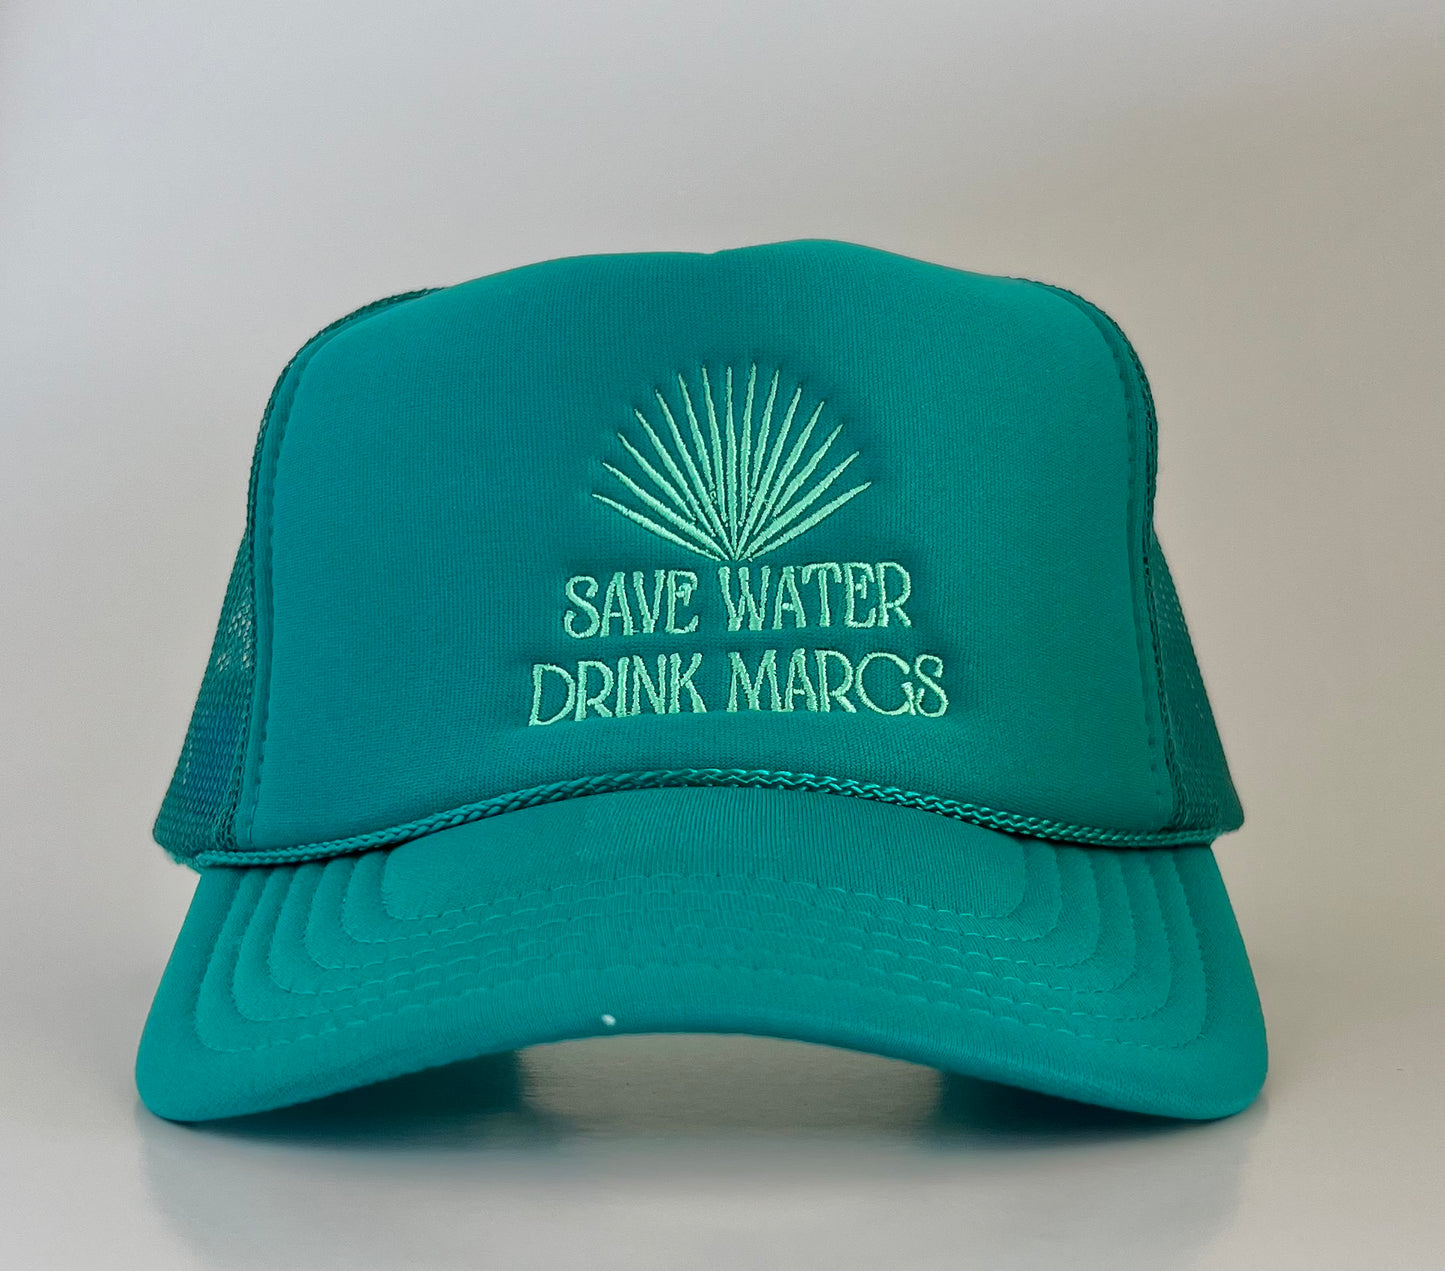 Save Water Drink Margs - Teal